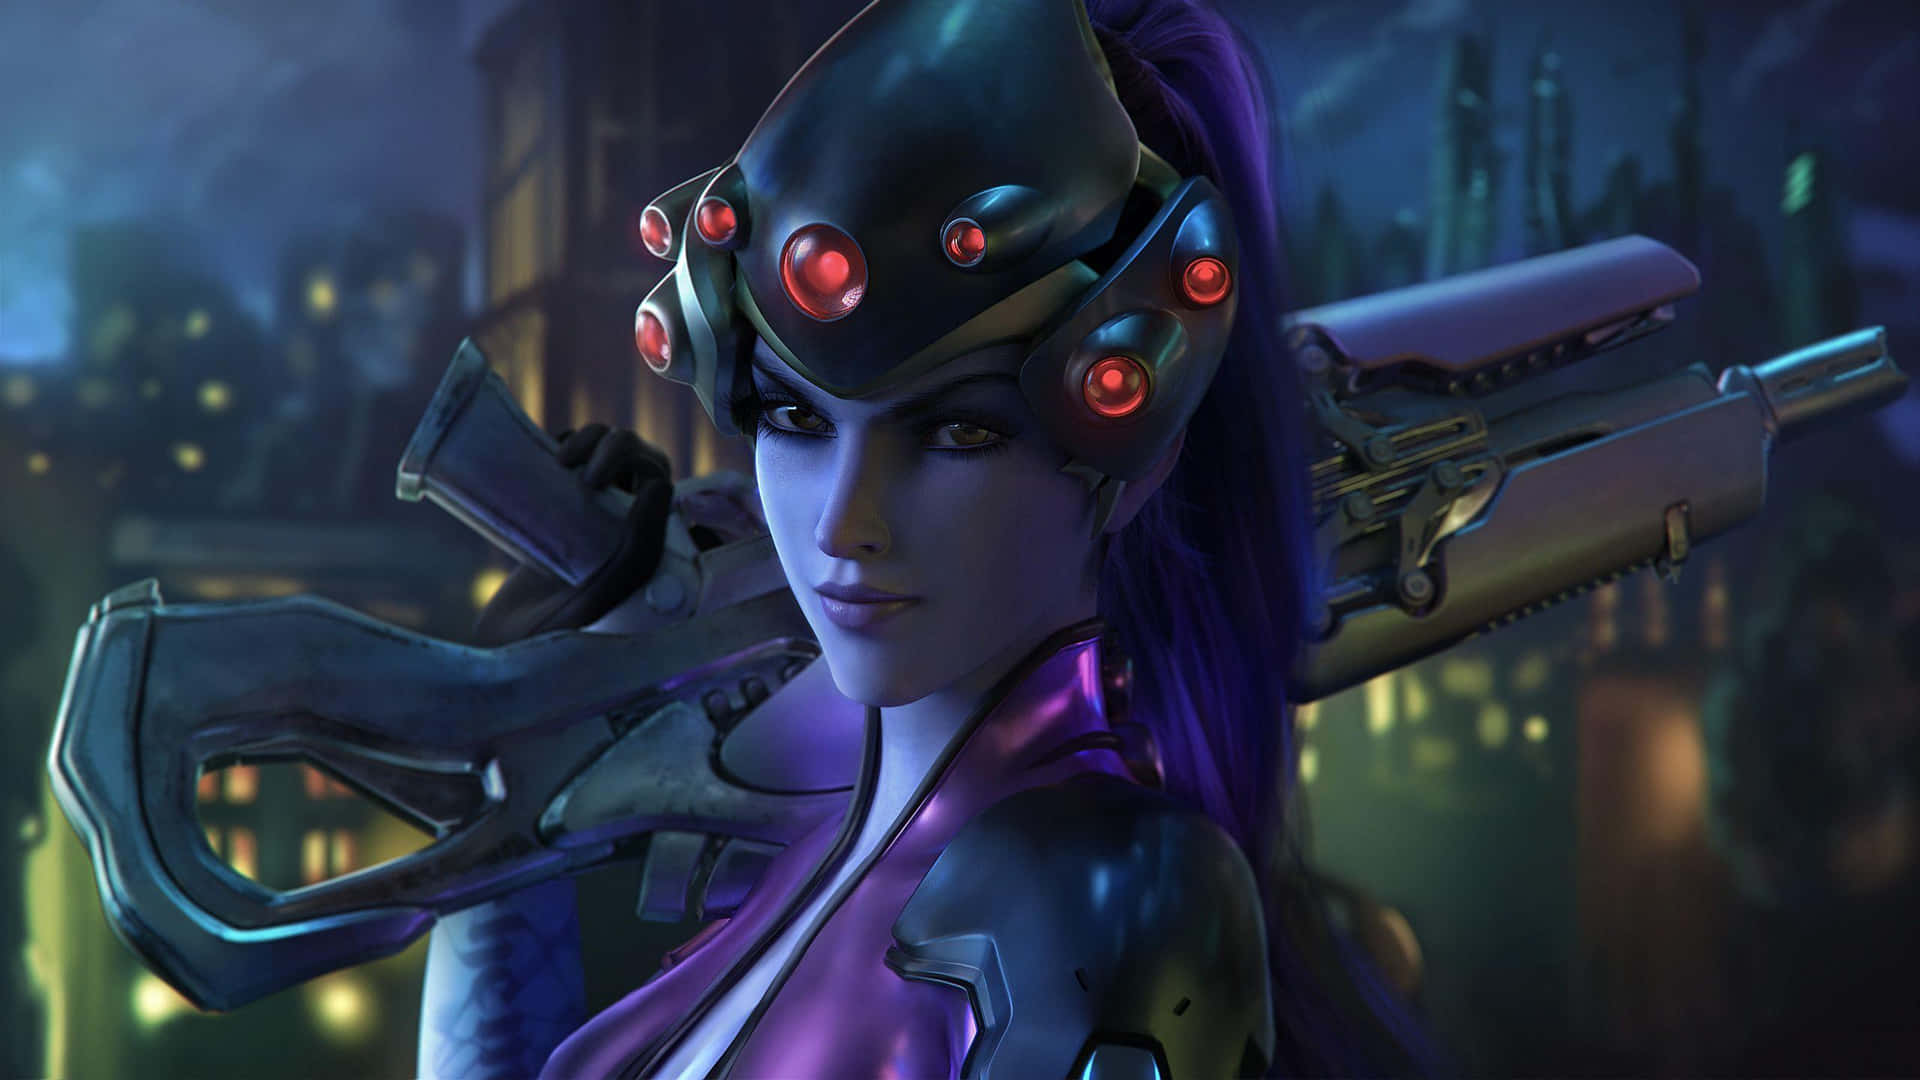 Ready your aim! Widowmaker prepares to unleash her ultimate attack in Overwatch. Wallpaper